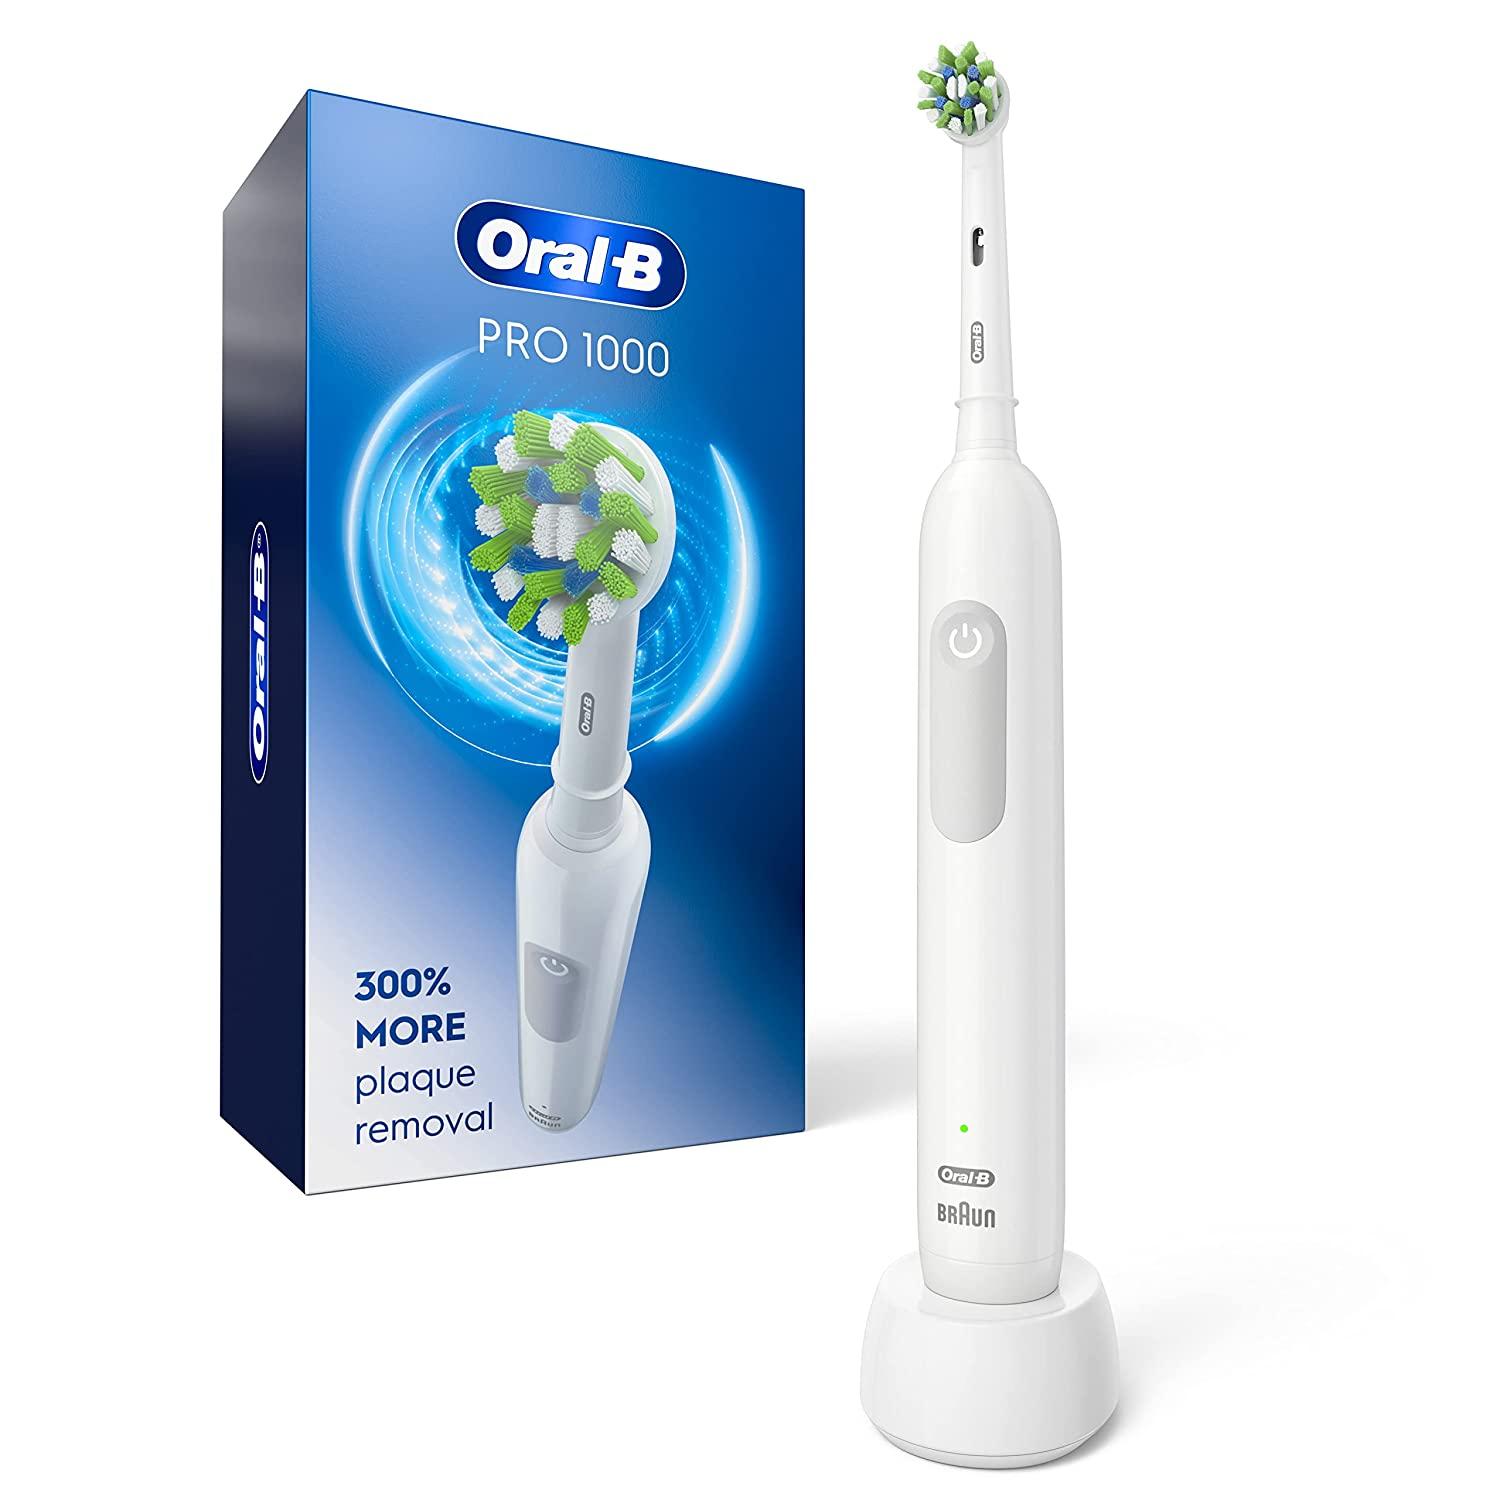 Oral-B Pro 1000 CrossAction Rechargeable Electric Toothbrush for $29.94 Shipped